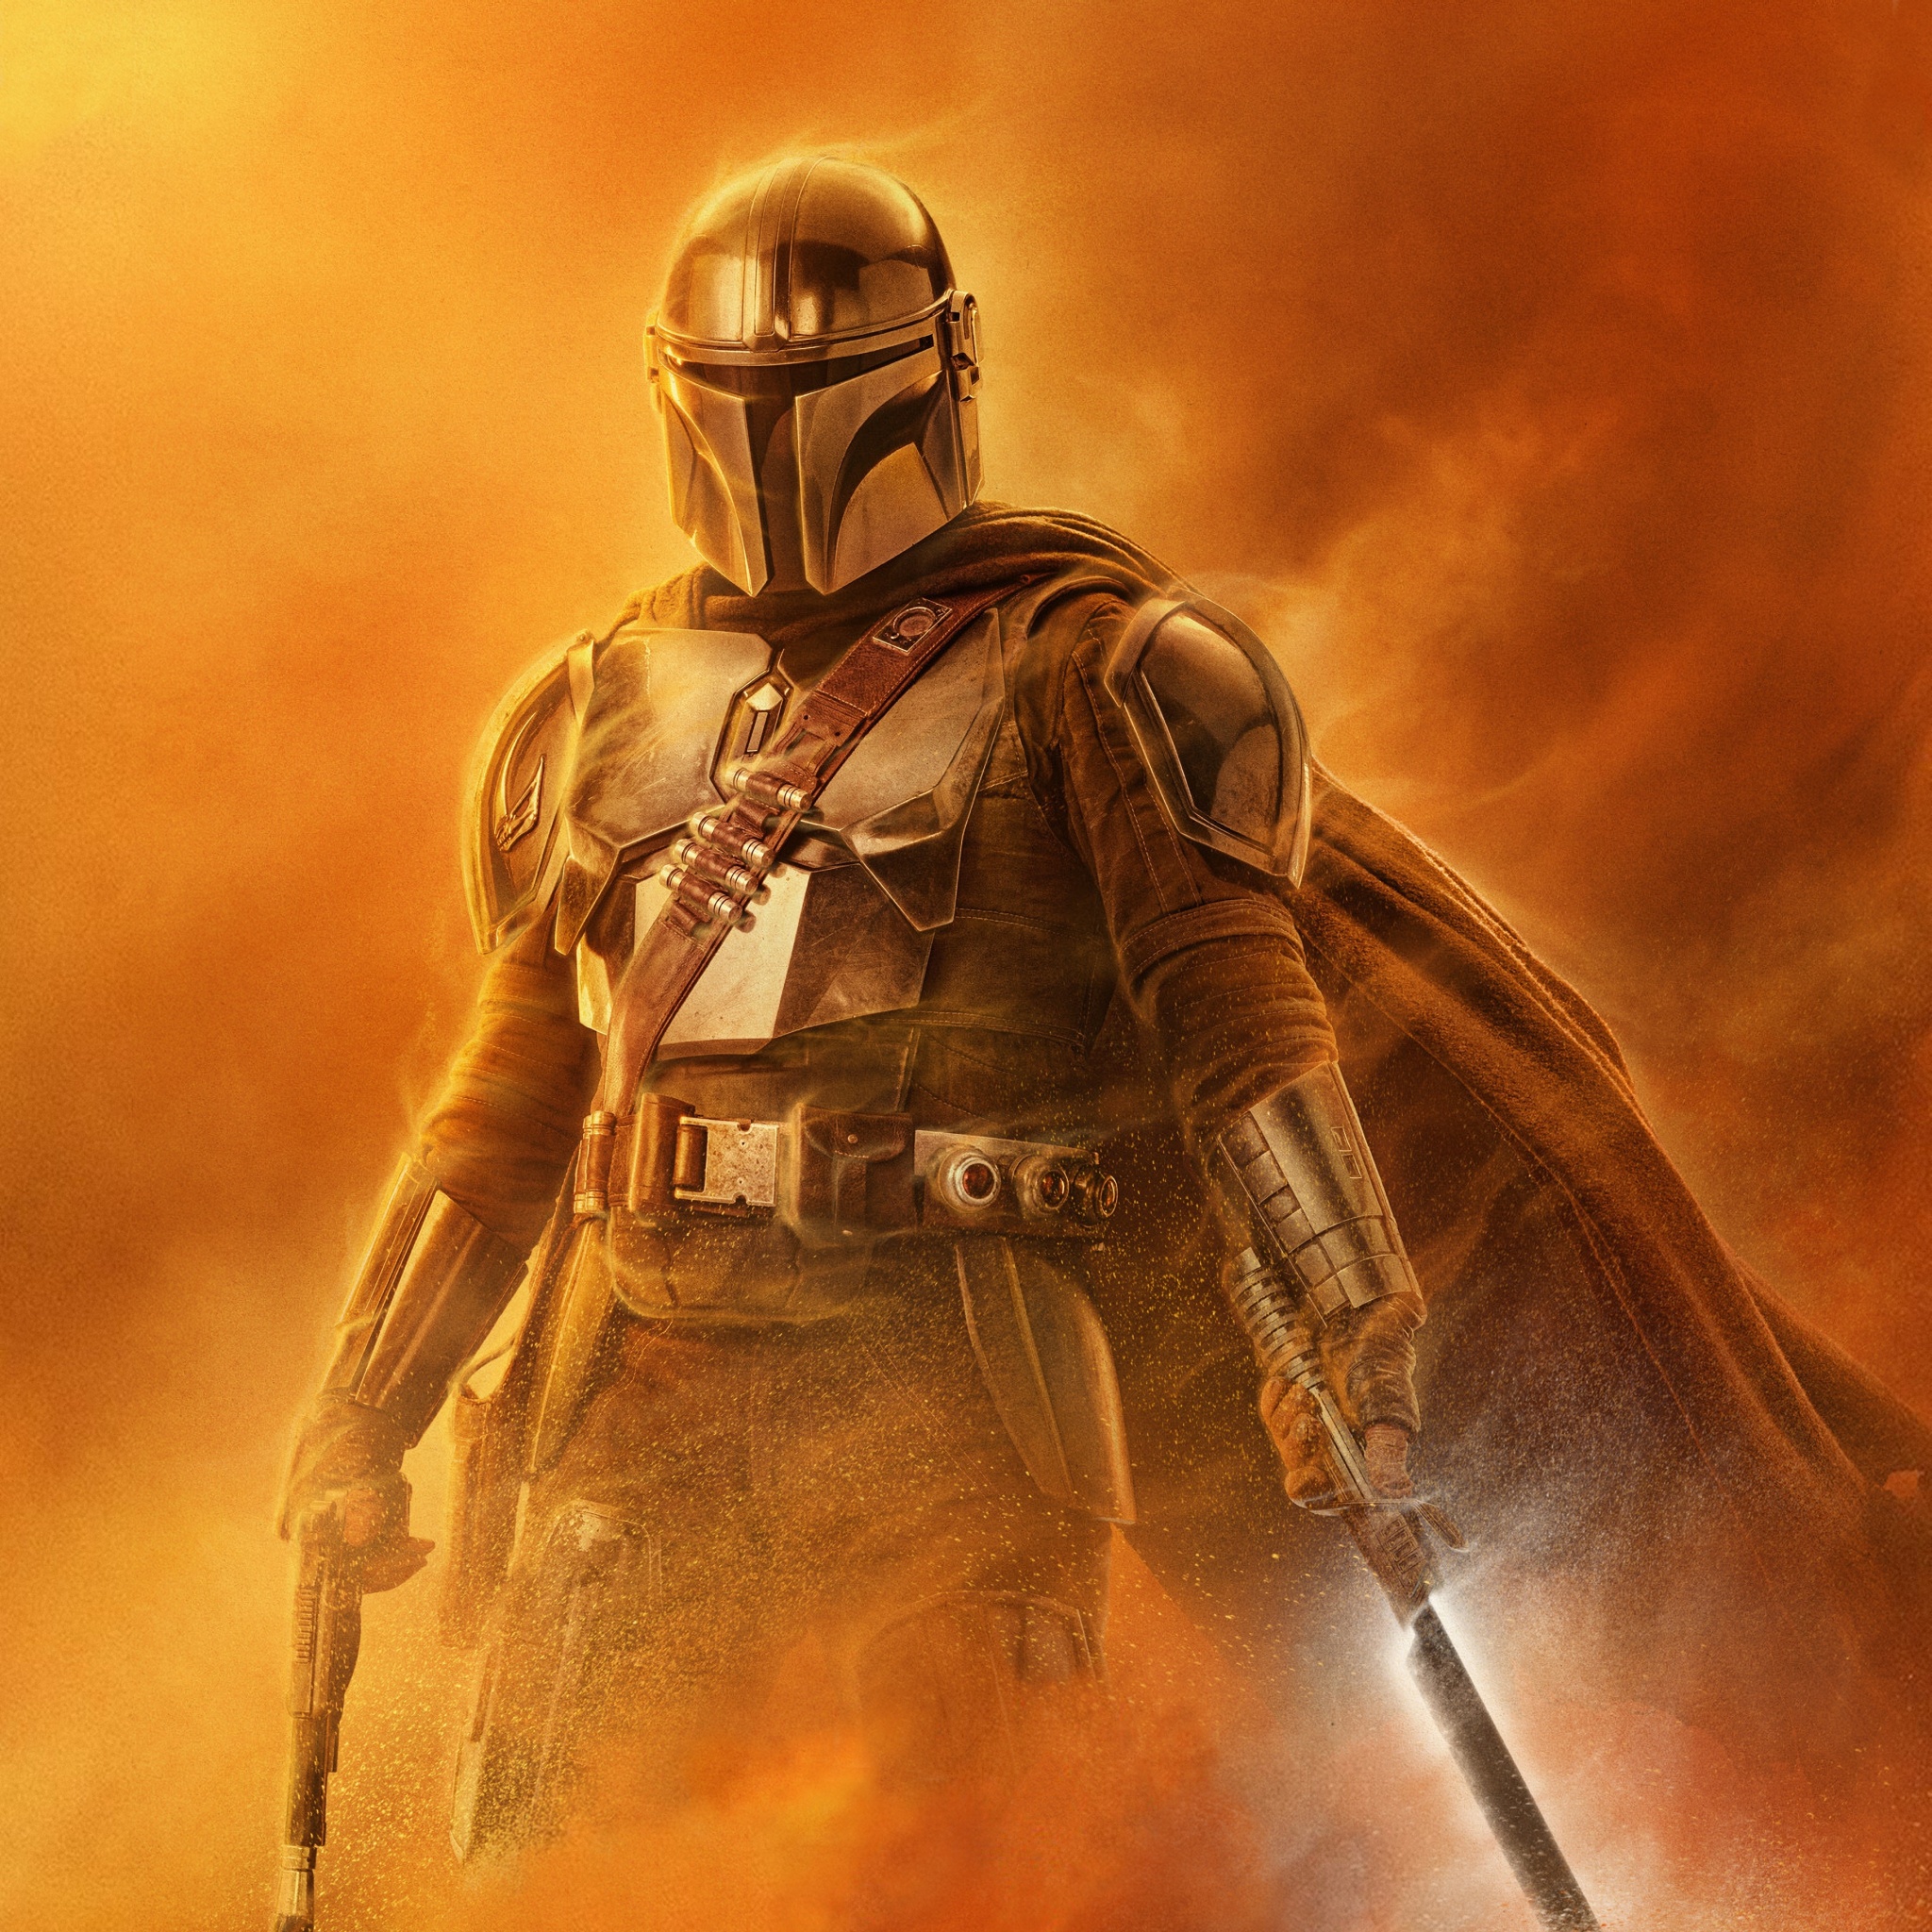 Star Wars The Mandalorian Season 3 4k Wallpaper,HD Tv Shows Wallpapers,4k  Wallpapers,Images,Backgrounds,Photos and Pictures